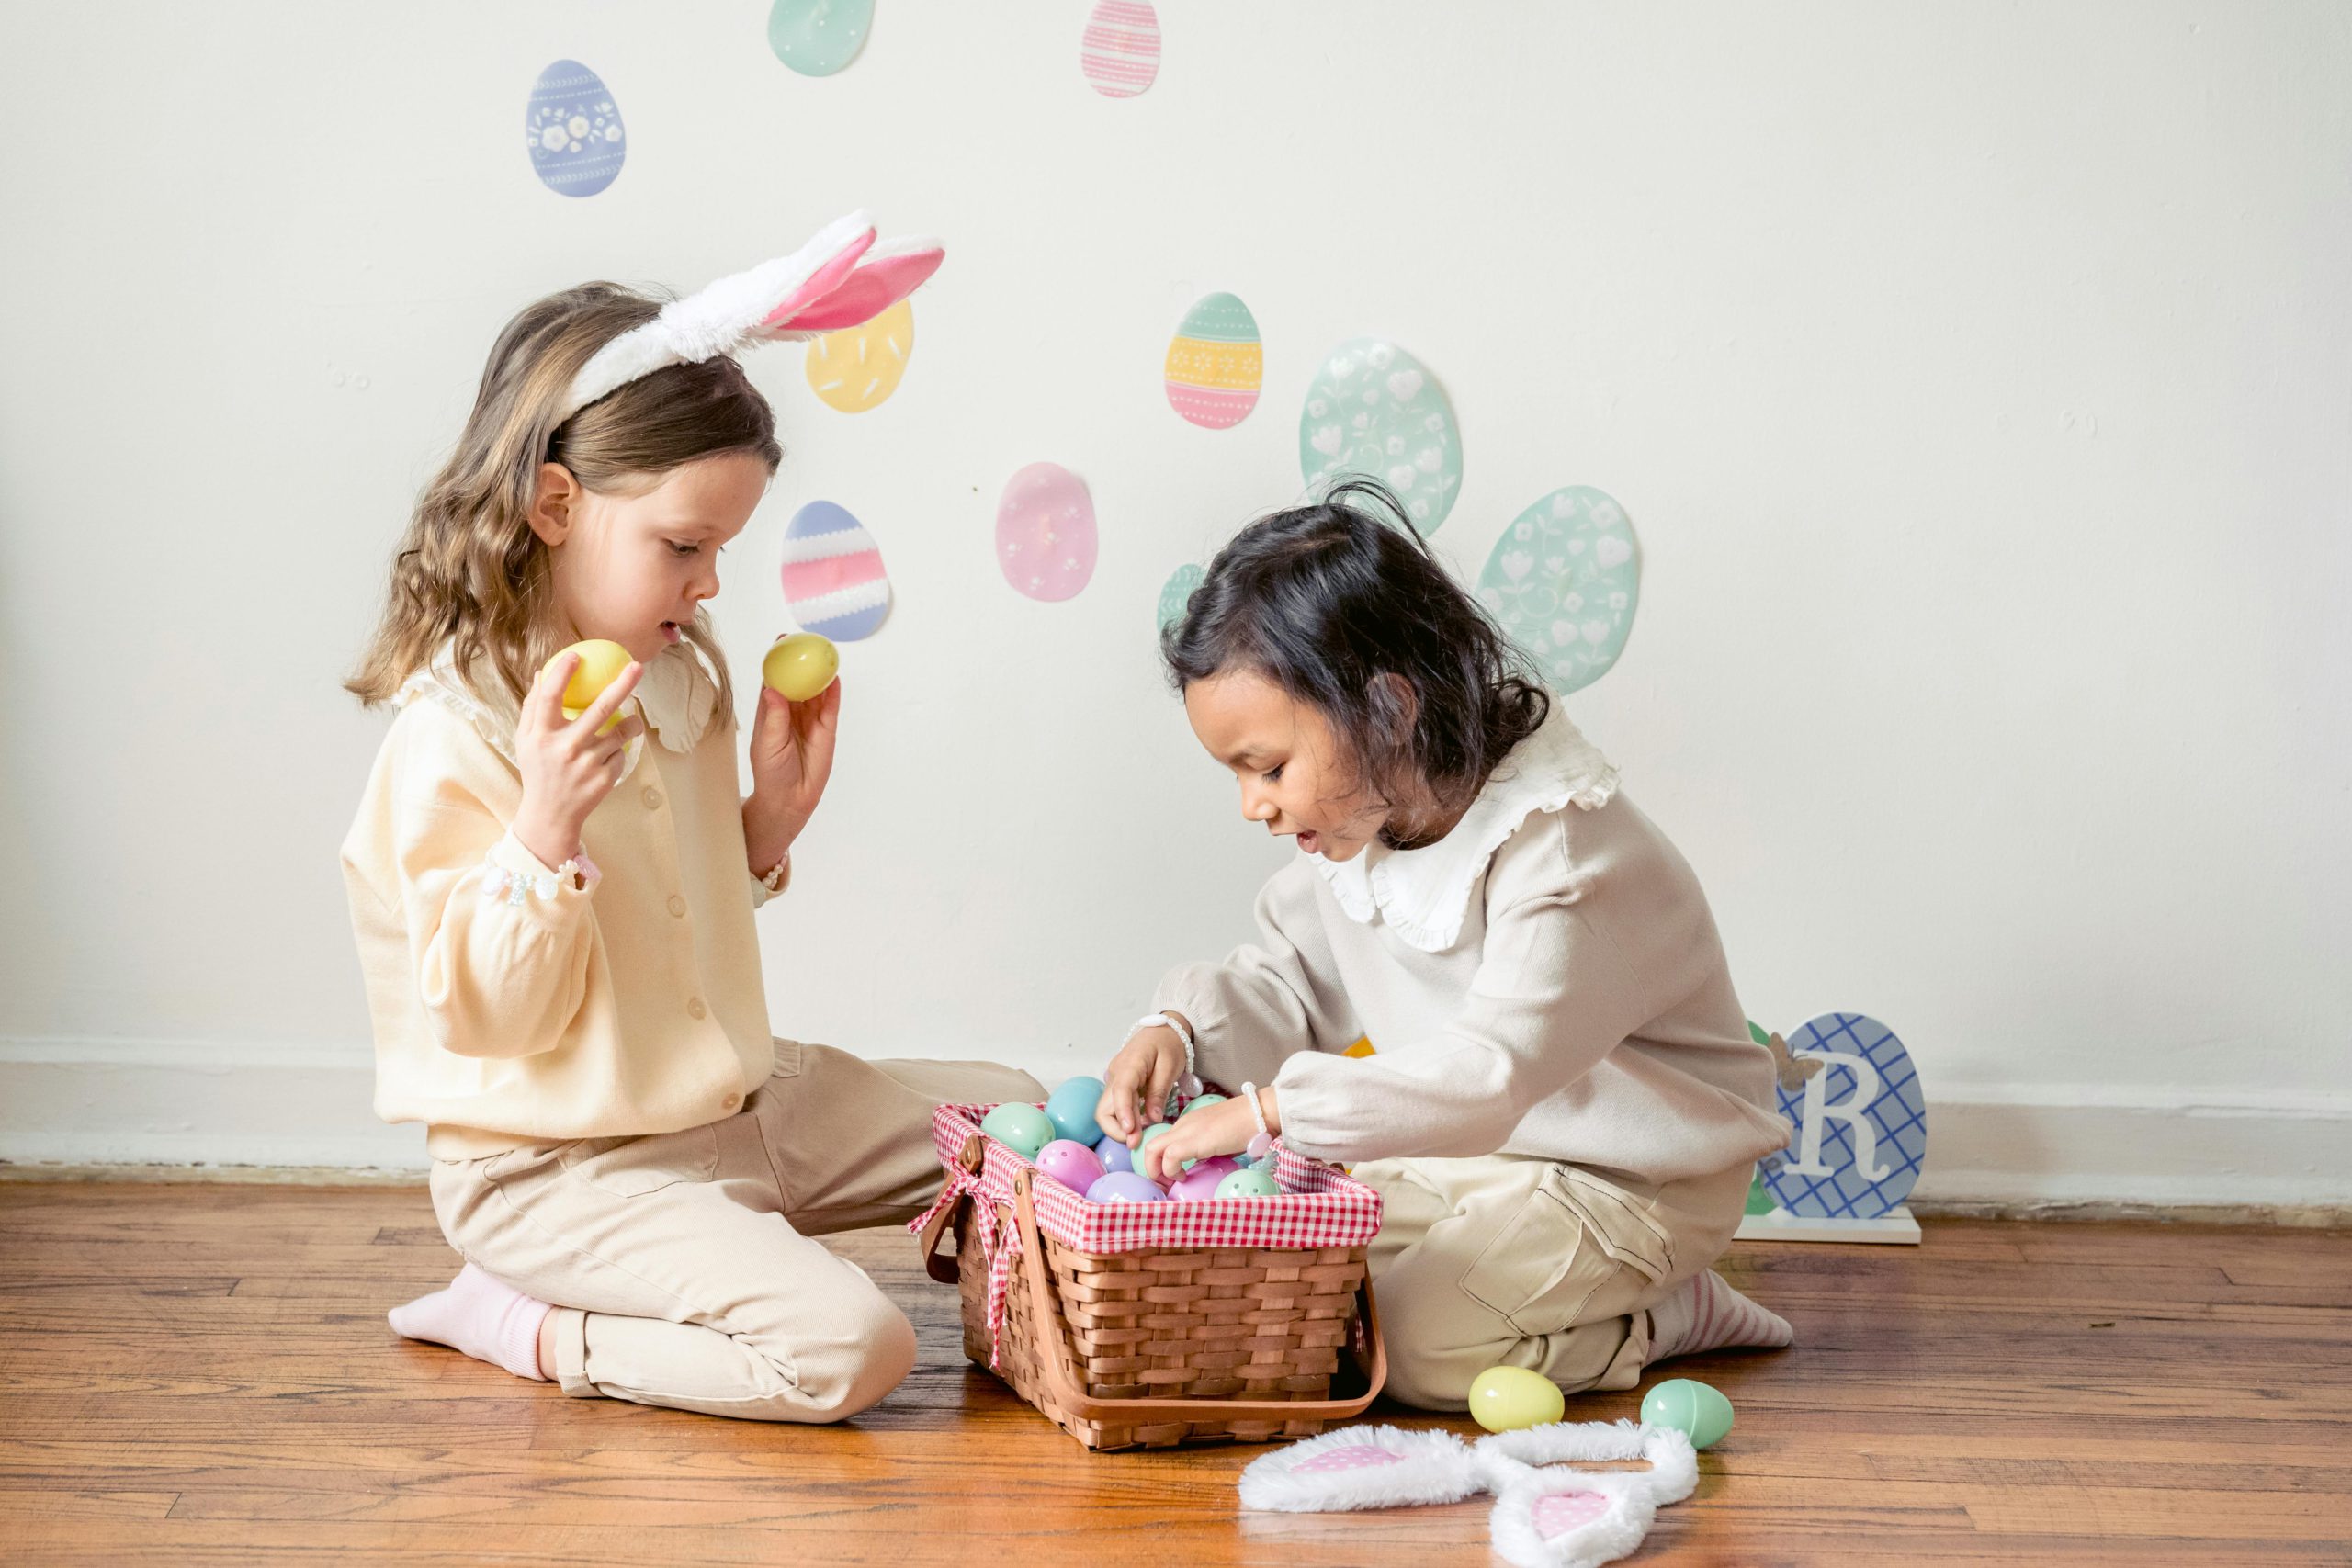 Easter basket ideas for toddlers